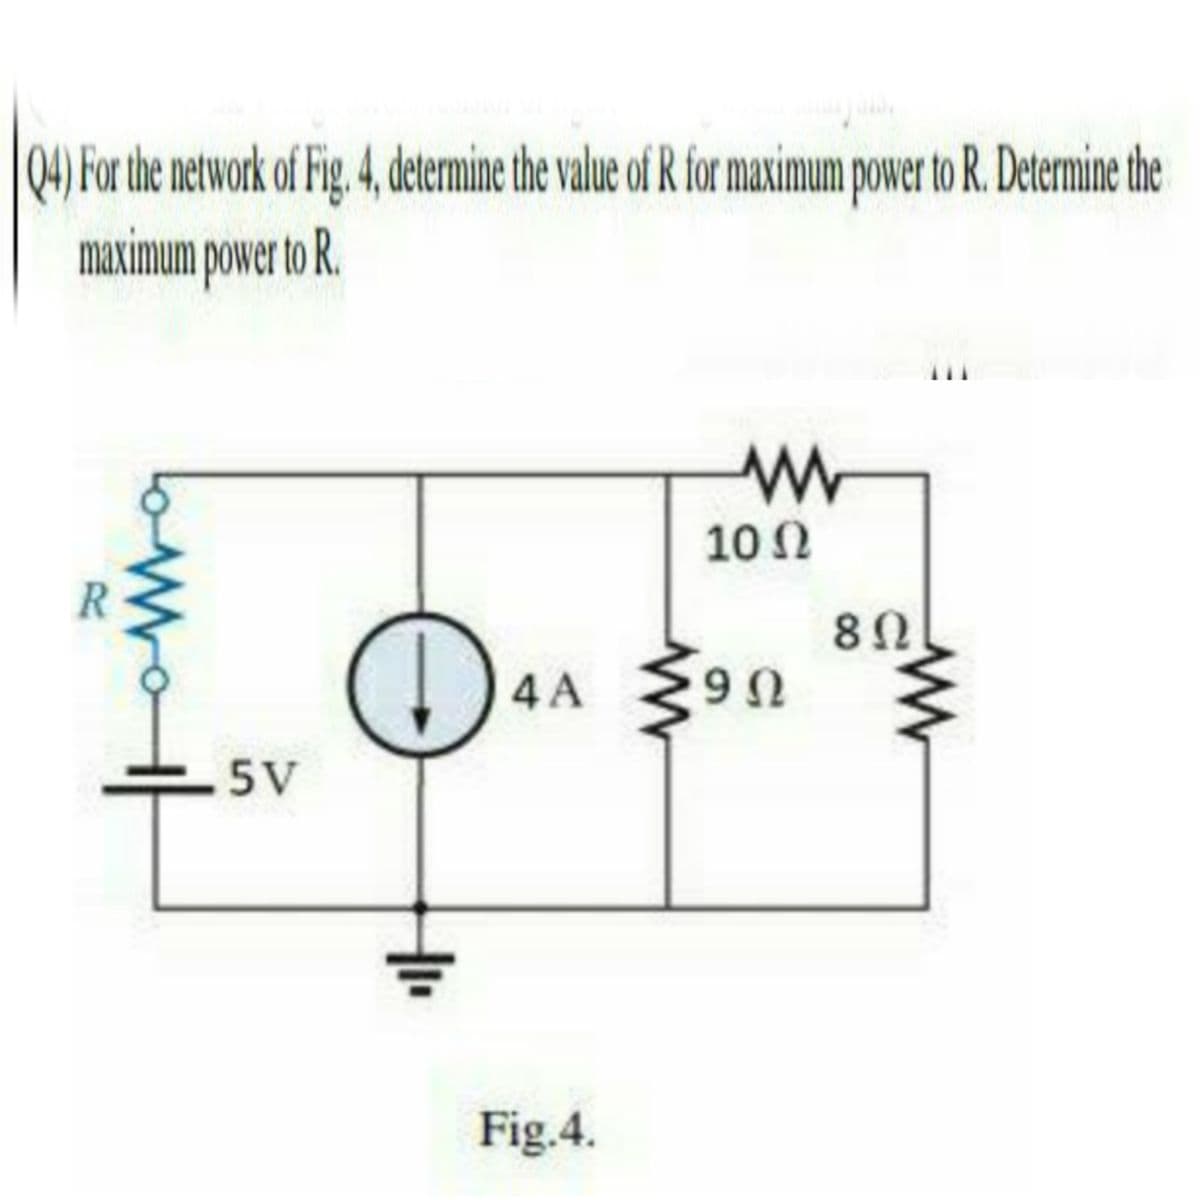 04) For the network of Fig, 4, determine the value of R for maximum power to R. Determine the
maximum power to R.
10 N
R.
82
4 A
Ω
5V
Fig.4.
